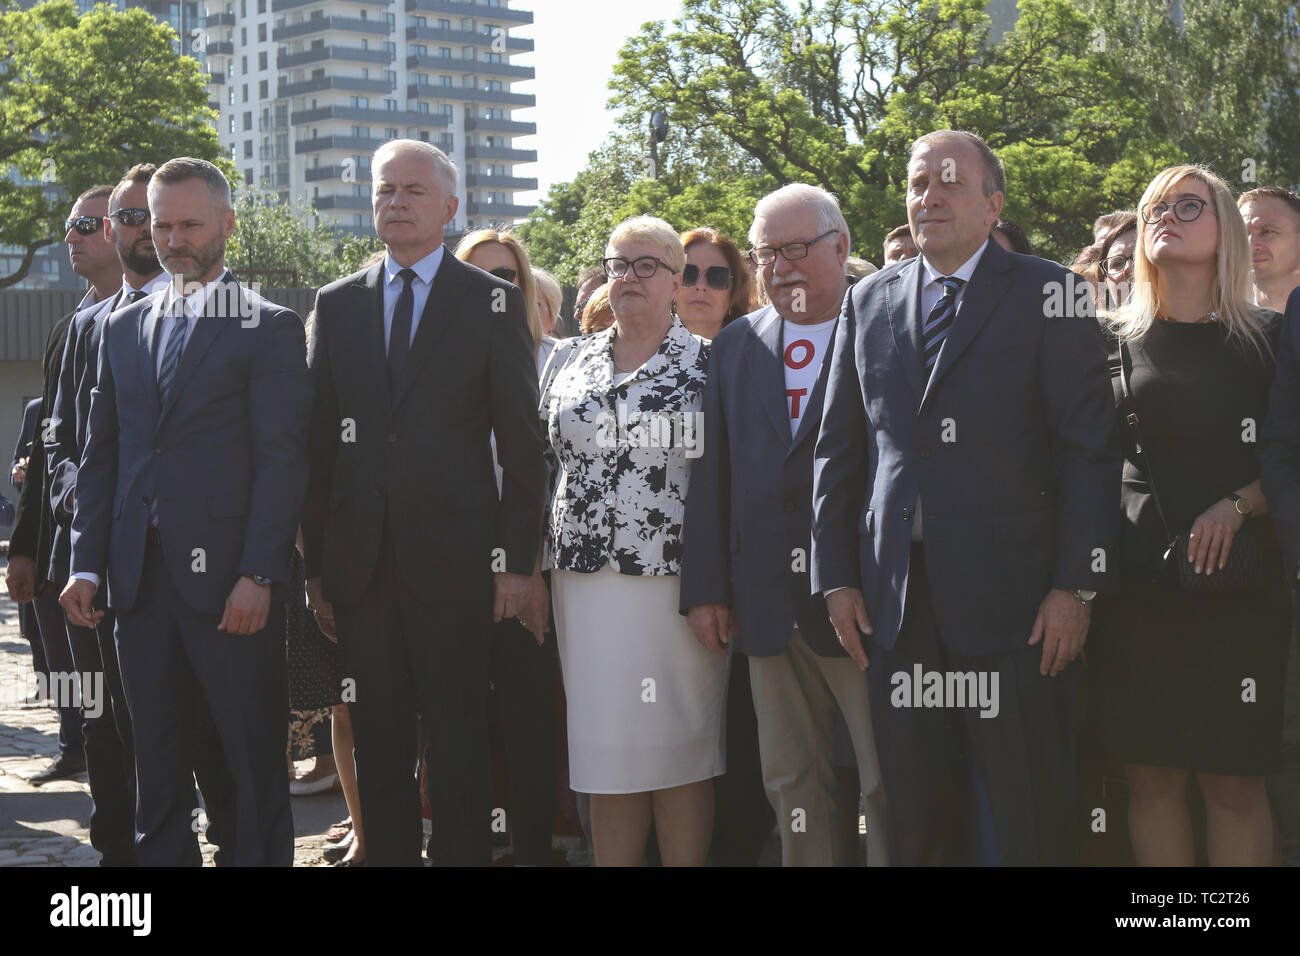 Gdansk, Poland. 4th June 2019 Local authorities and former president of Poland Lech Walesa laid flowers under the Fallen Shipyard Workers Monument . Lech Walesa, Grzegorz Schetyna and Henryka Krzywonos are seen . Freedom and Solidarity Days mark 30th anniversary of the first partly free elections in Poland on 4th of June 1989. © Vadim Pacajev / Alamy Live News Stock Photo